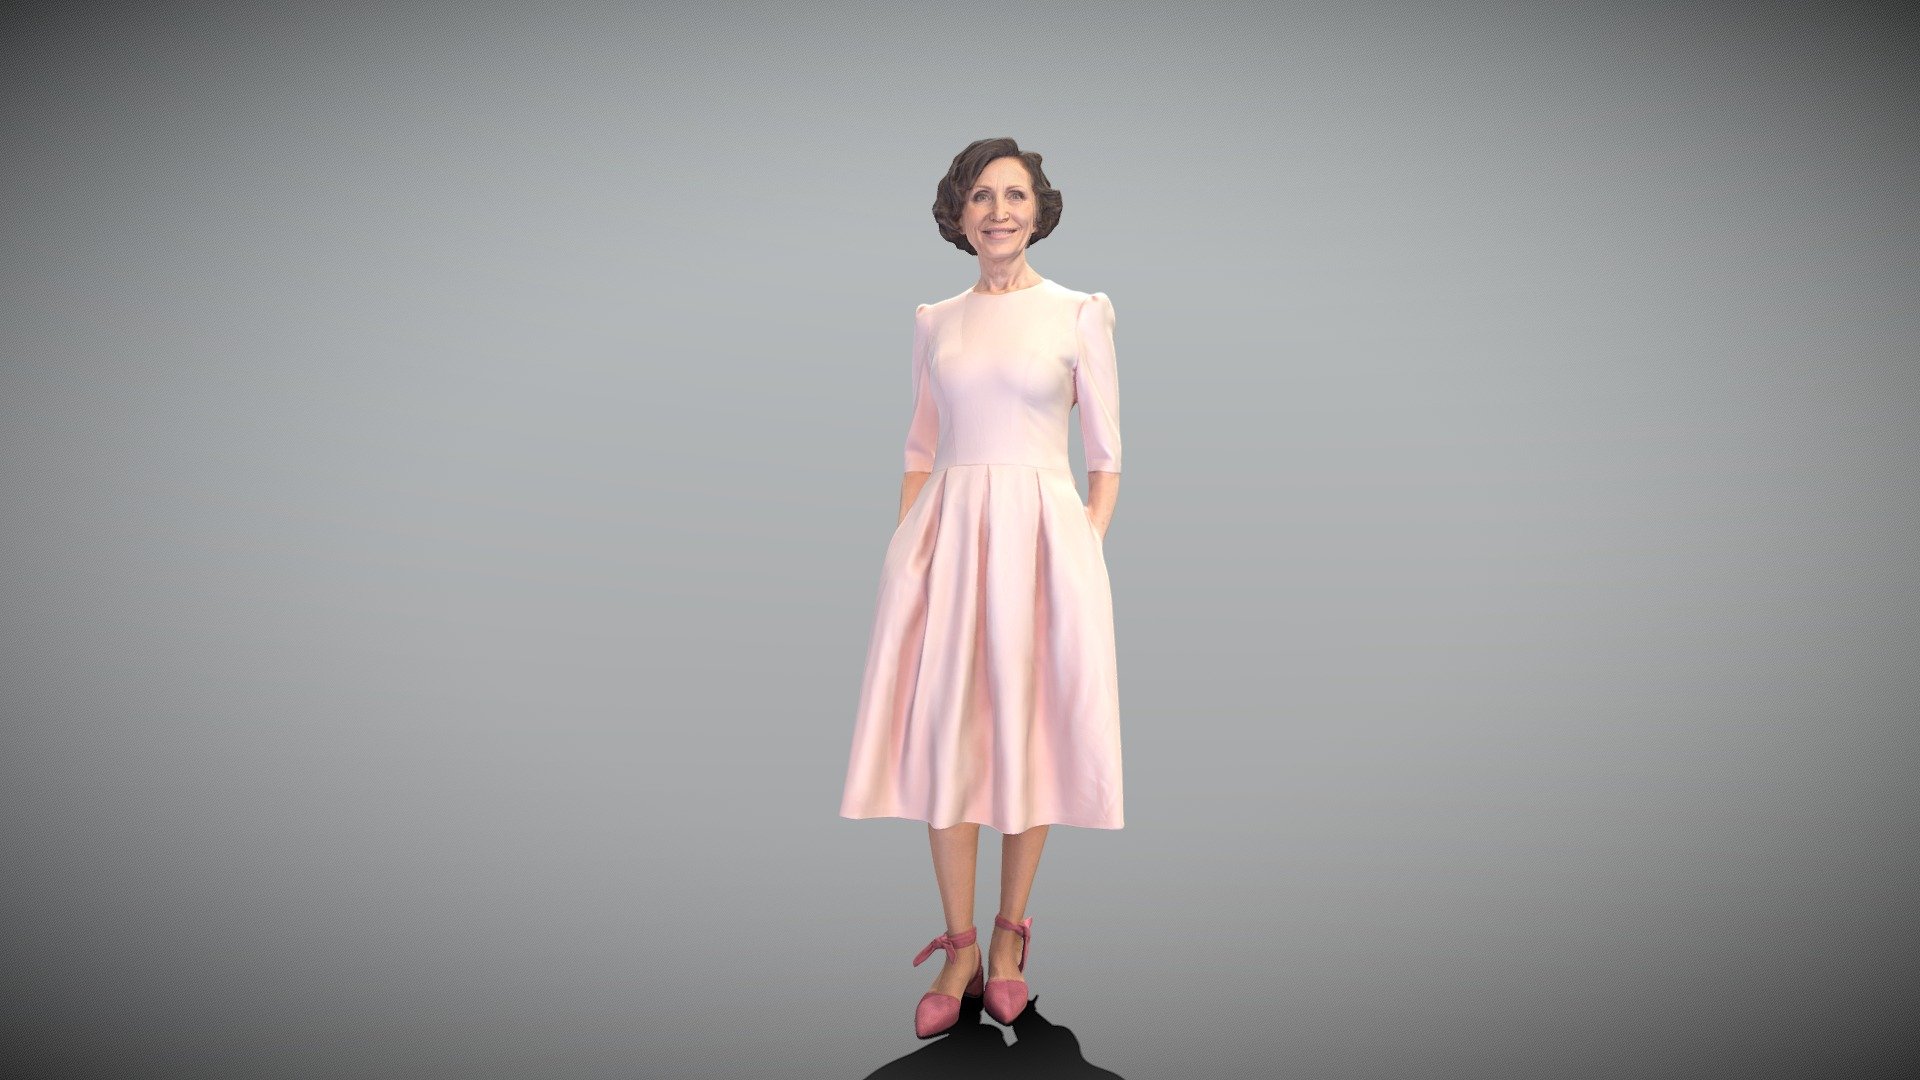 This is a true human size and detailed model of a beautiful mature woman of Caucasian appearance dressed in elegant dress. The model is captured in casual pose to be perfectly matching for various architectural, product visualization as a background character within urban installations, city designs, indoor/outdoor design presentations, VR/AR content, etc.

Technical specifications:




digital double 3d scan model

150k &amp; 30k triangles | double triangulated

high-poly model (.ztl tool with 5 subdivisions) clean and retopologized automatically via ZRemesher

sufficiently clean

PBR textures 8K resolution: Diffuse, Normal, Specular maps

non-overlapping UV map

no extra plugins are required for this model

Download package includes a Cinema 4D project file with Redshift shader, OBJ, FBX, STL files, which are applicable for 3ds Max, Maya, Unreal Engine, Unity, Blender, etc. All the textures you will find in the “Tex” folder, included into the main archive.

3D EVERYTHING

Stand with Ukraine! - Elegant mature lady in dress 395 - Buy Royalty Free 3D model by deep3dstudio 3d model